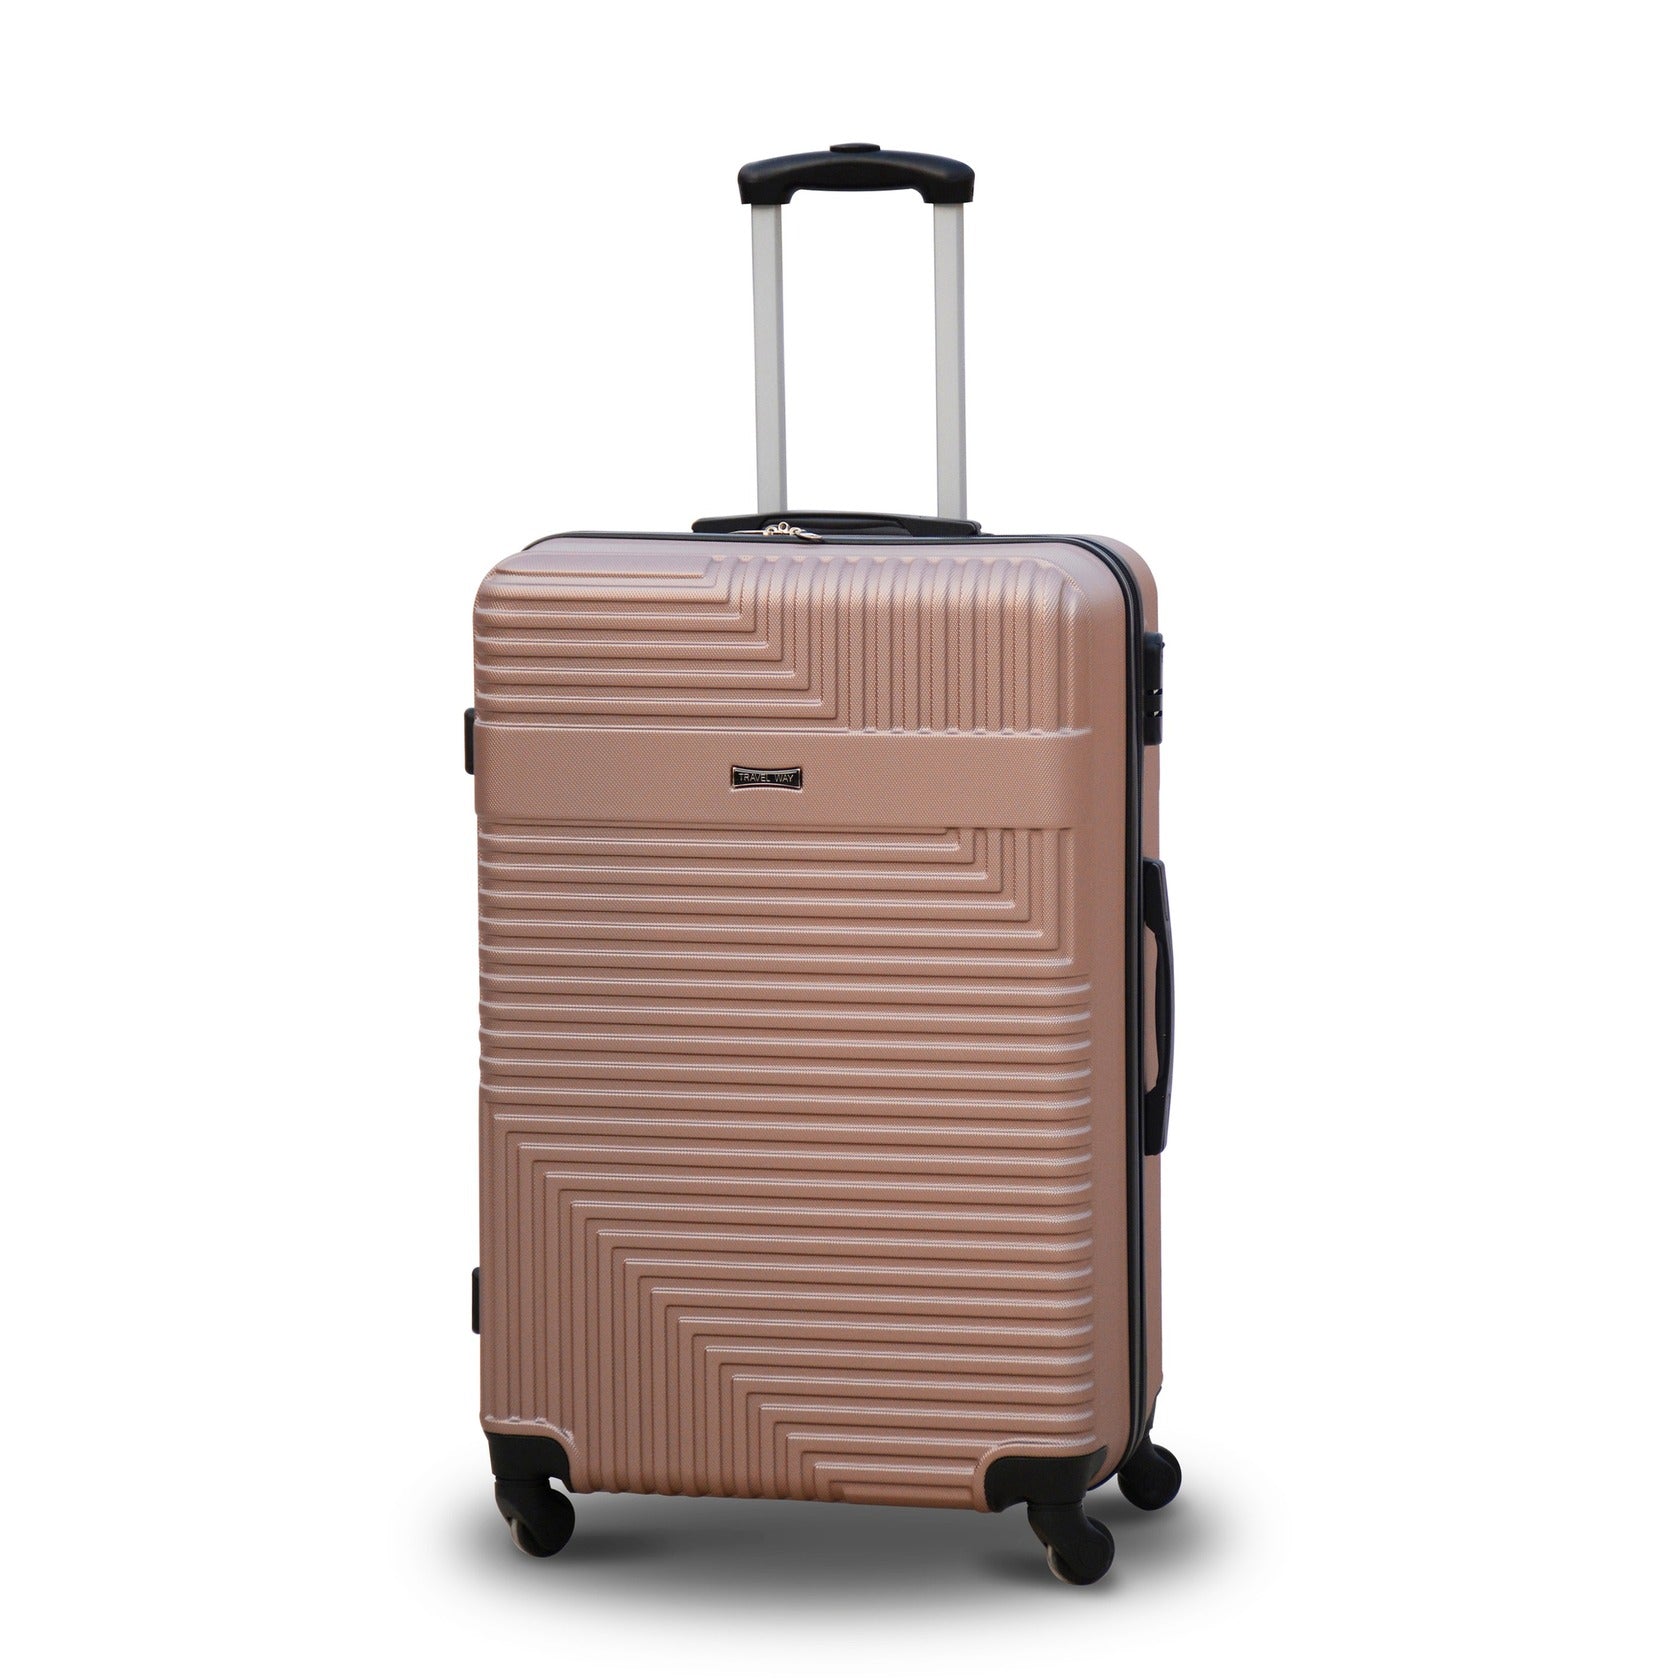 28" Rose Gold Colour Travel Way ABS Luggage Lightweight Hard Case Trolley Bag